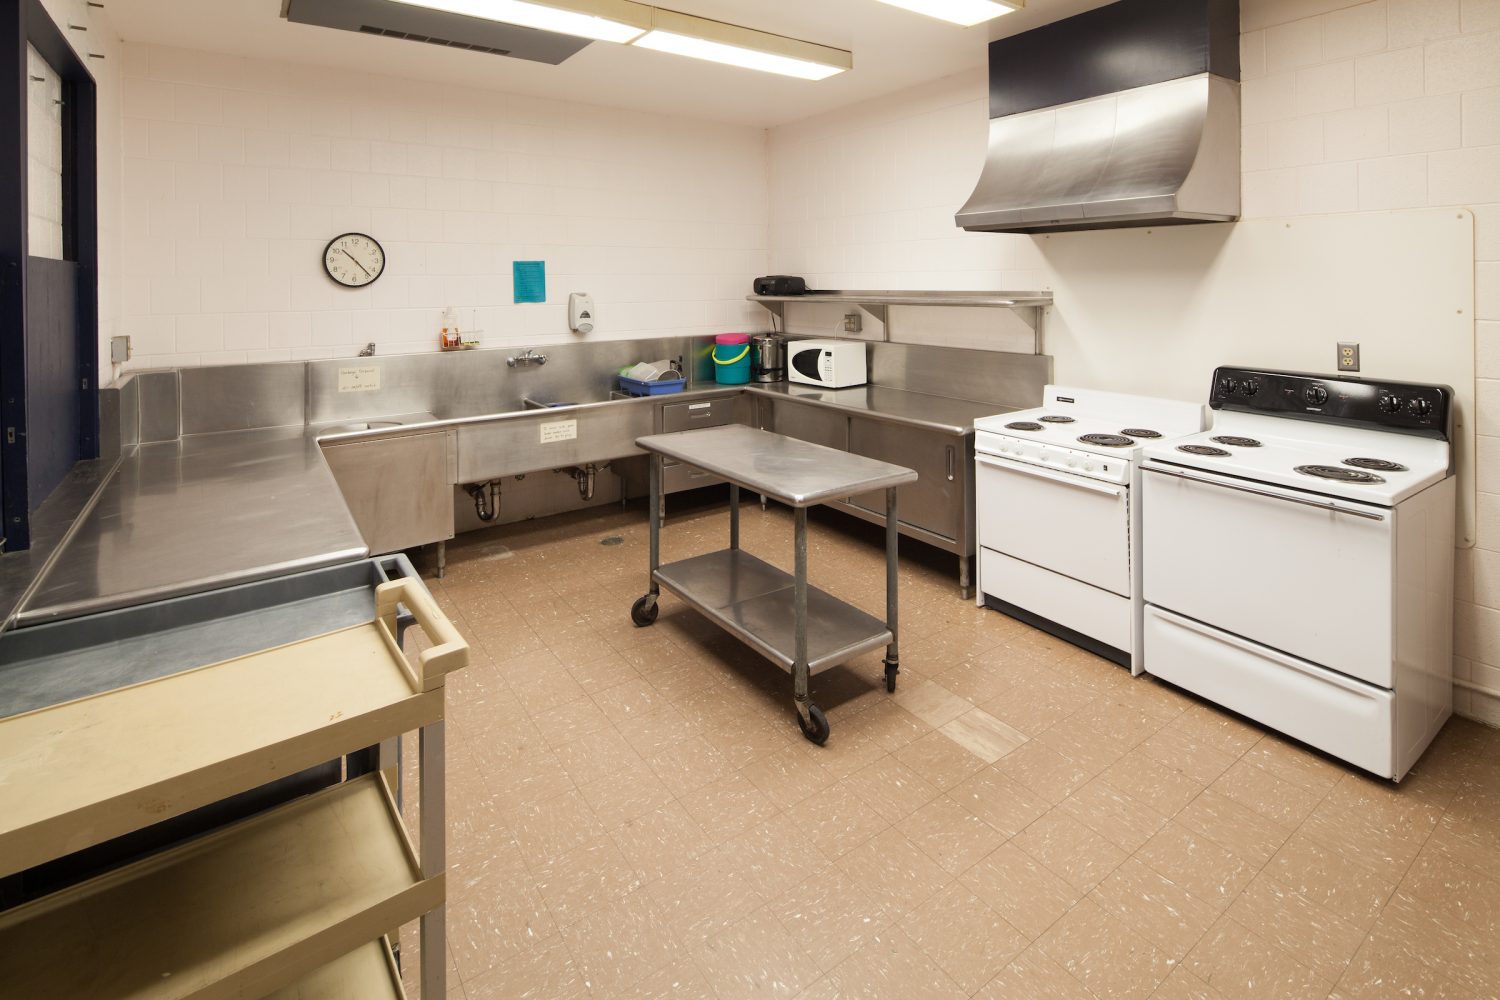 Community Kitchen located in University Apartments Community Center